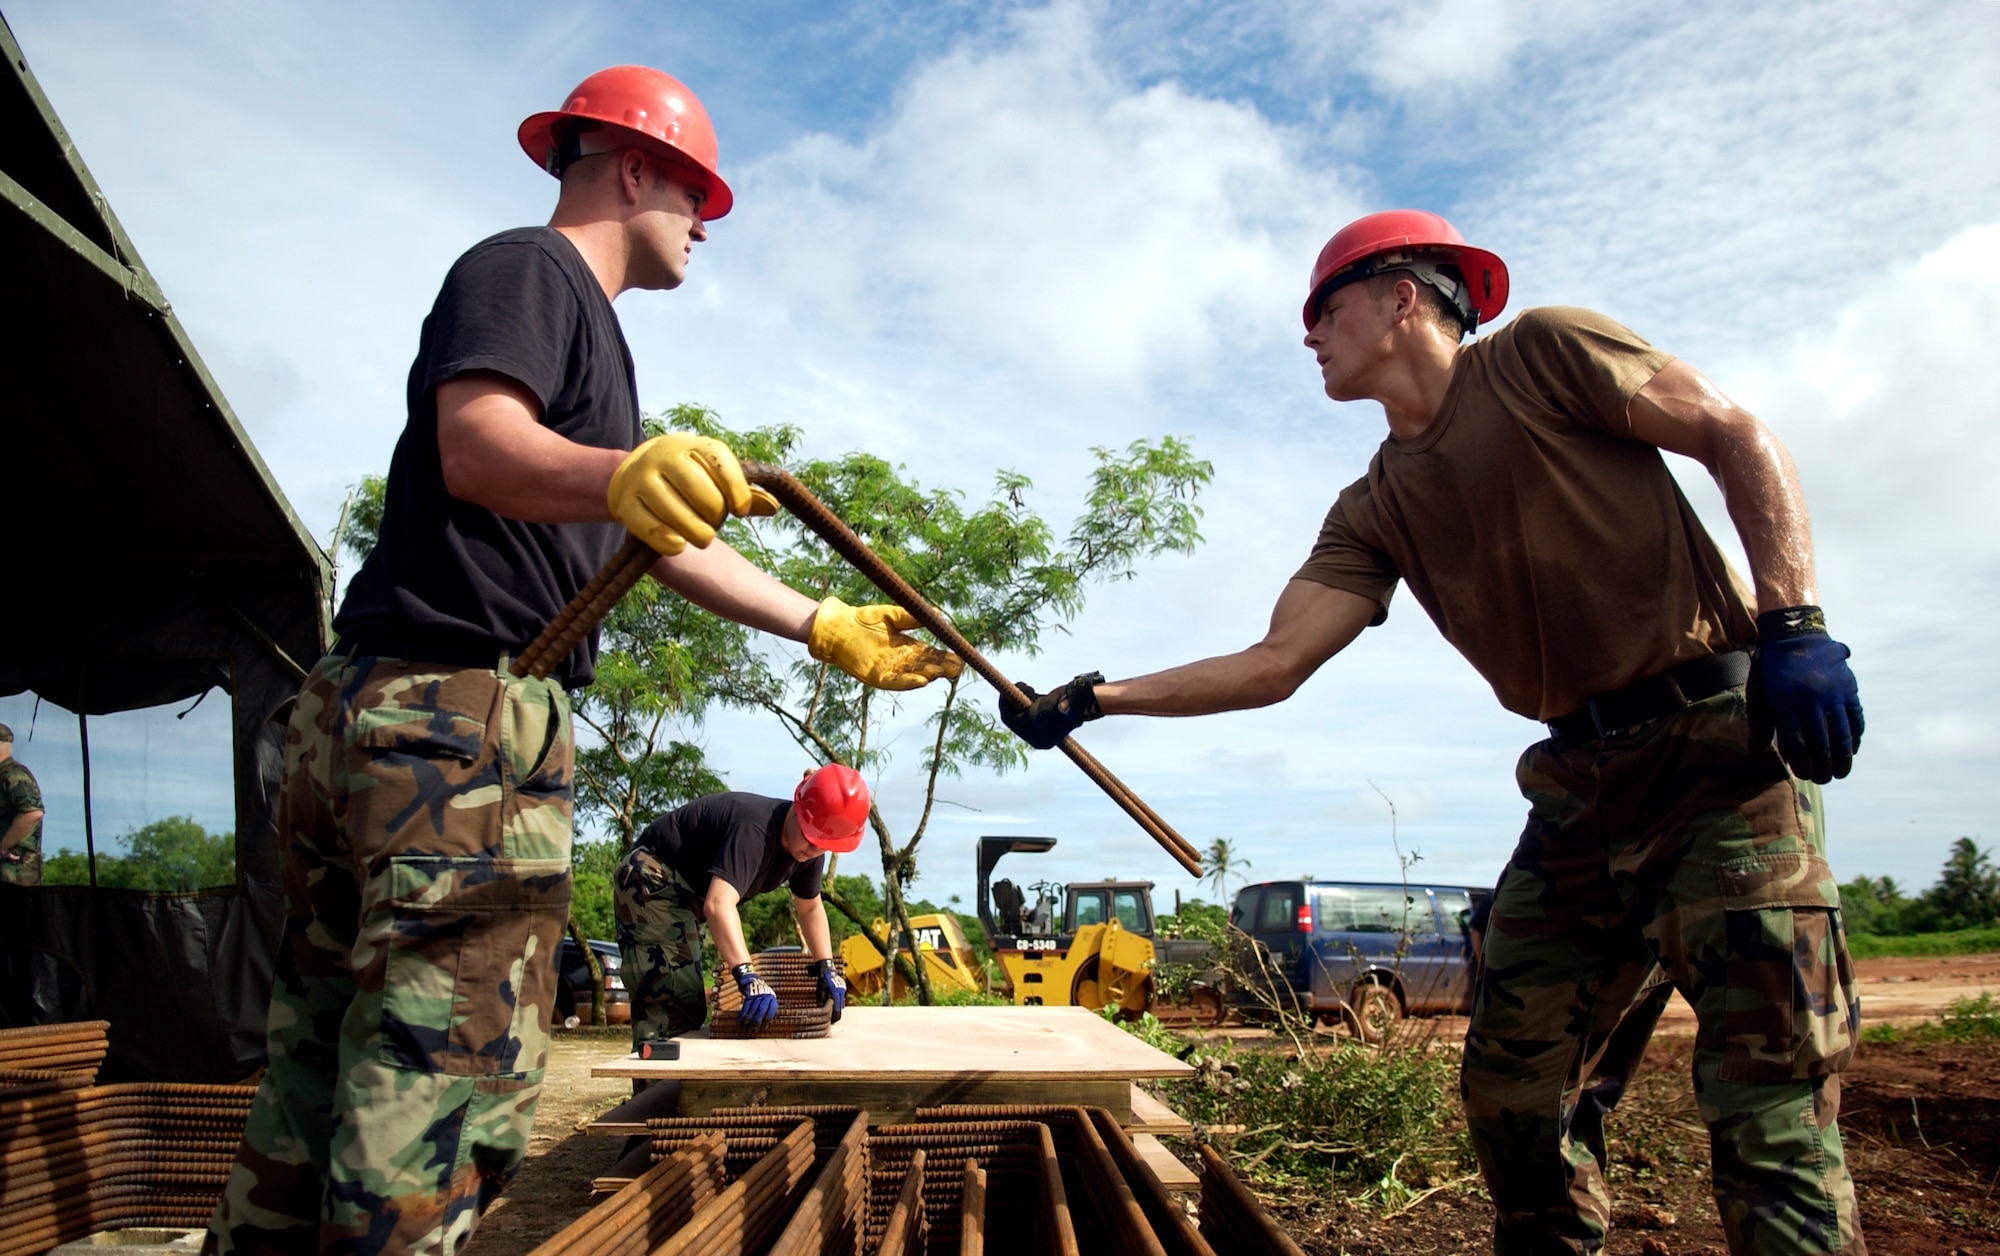 ANDERSEN AFB, GUAM - Staff Sgt. Jeremy Reneau passes a piece of rebar to Airman 1st Class Christopher David, 554th RED HORSE Squadron, at Northwest Field, Aug. 22, 2007.  The 554th RED HORSE Squadron is currently building new infastructure on Northwest Field. (Photo by Senior Airman Miranda Moorer/36th Wing Public Affairs)